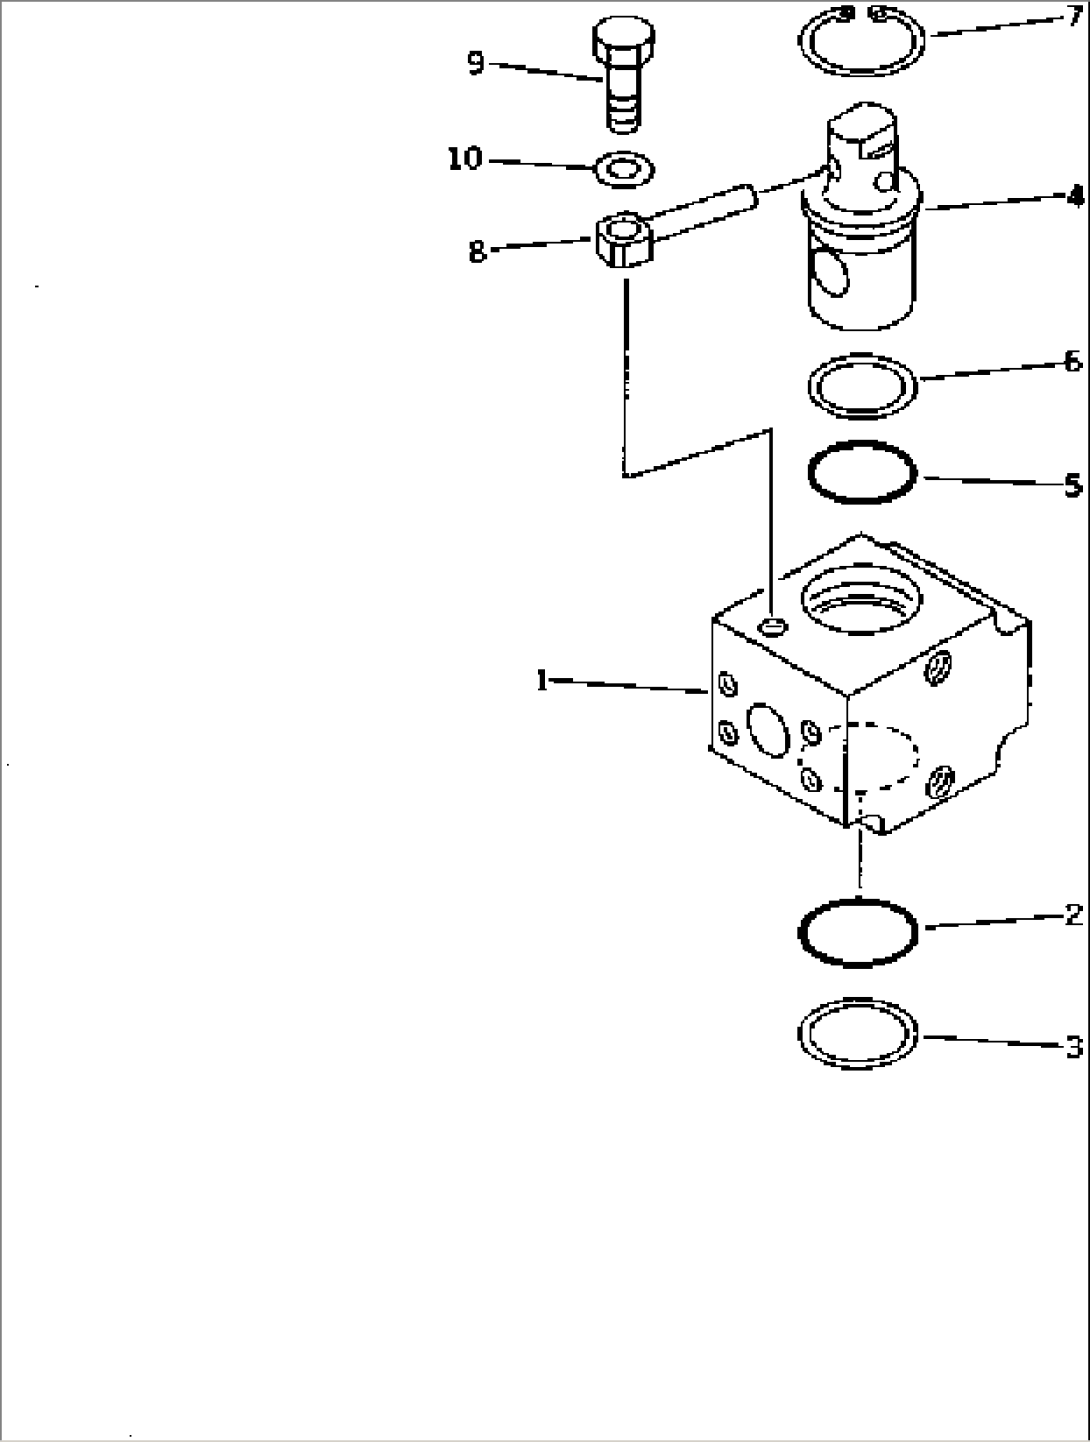 STOP VALVE (FOR ADDITIONAL PIPING)(#10001-10159)